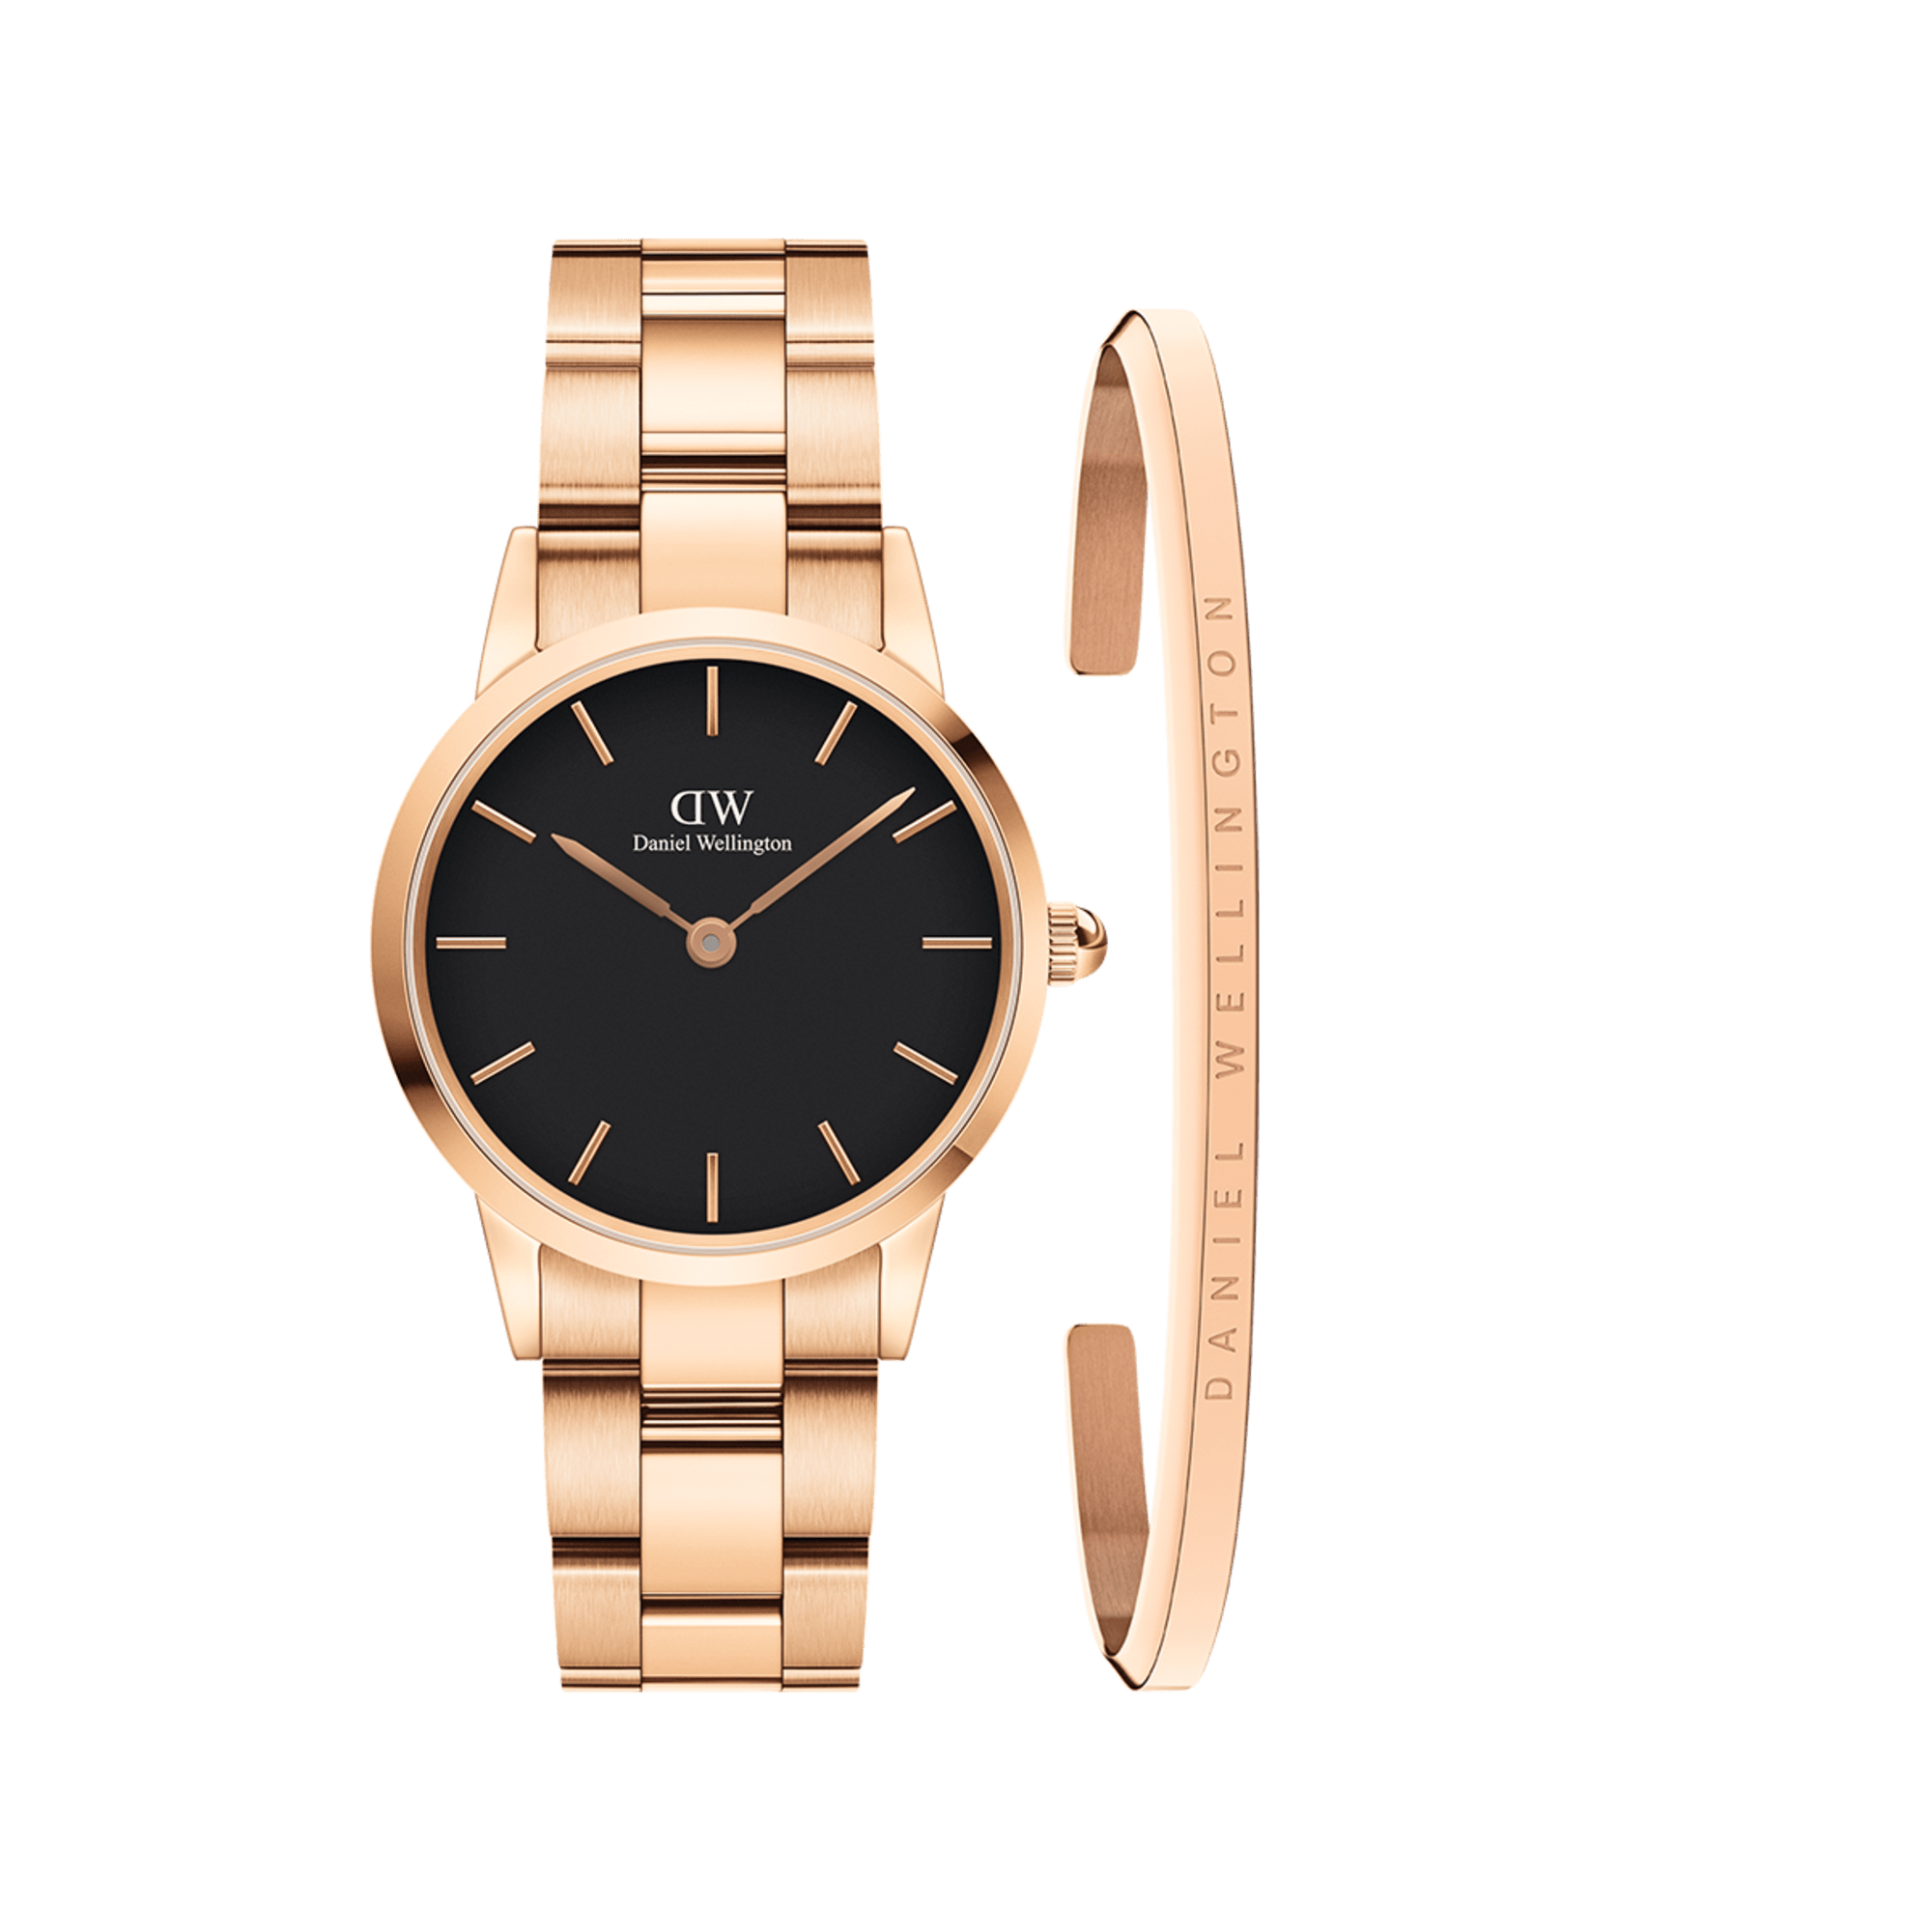 Gift Sets - Watches and Jewelry for him and her | DW